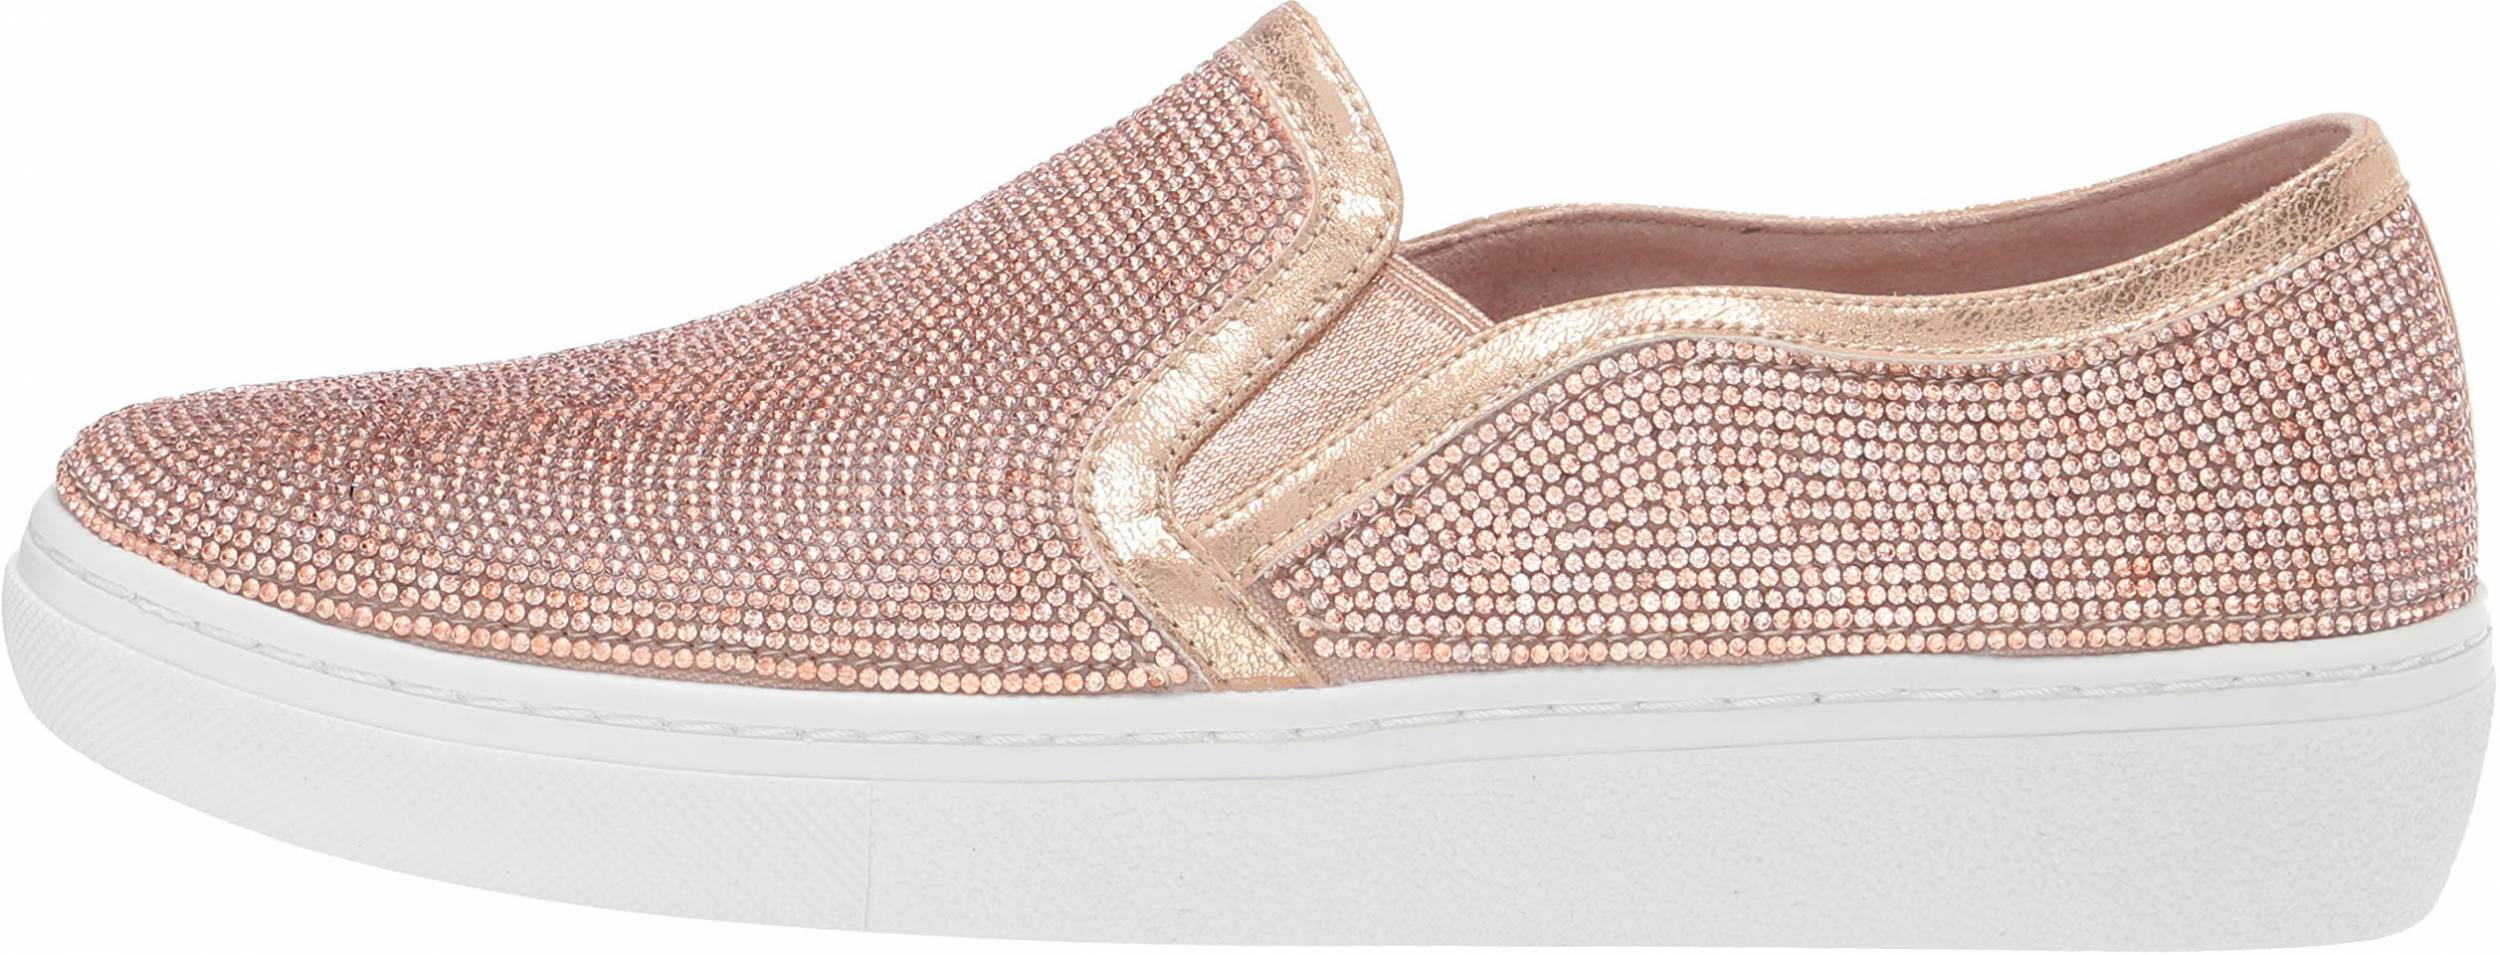 Only $55 + Review of Skechers Goldie 